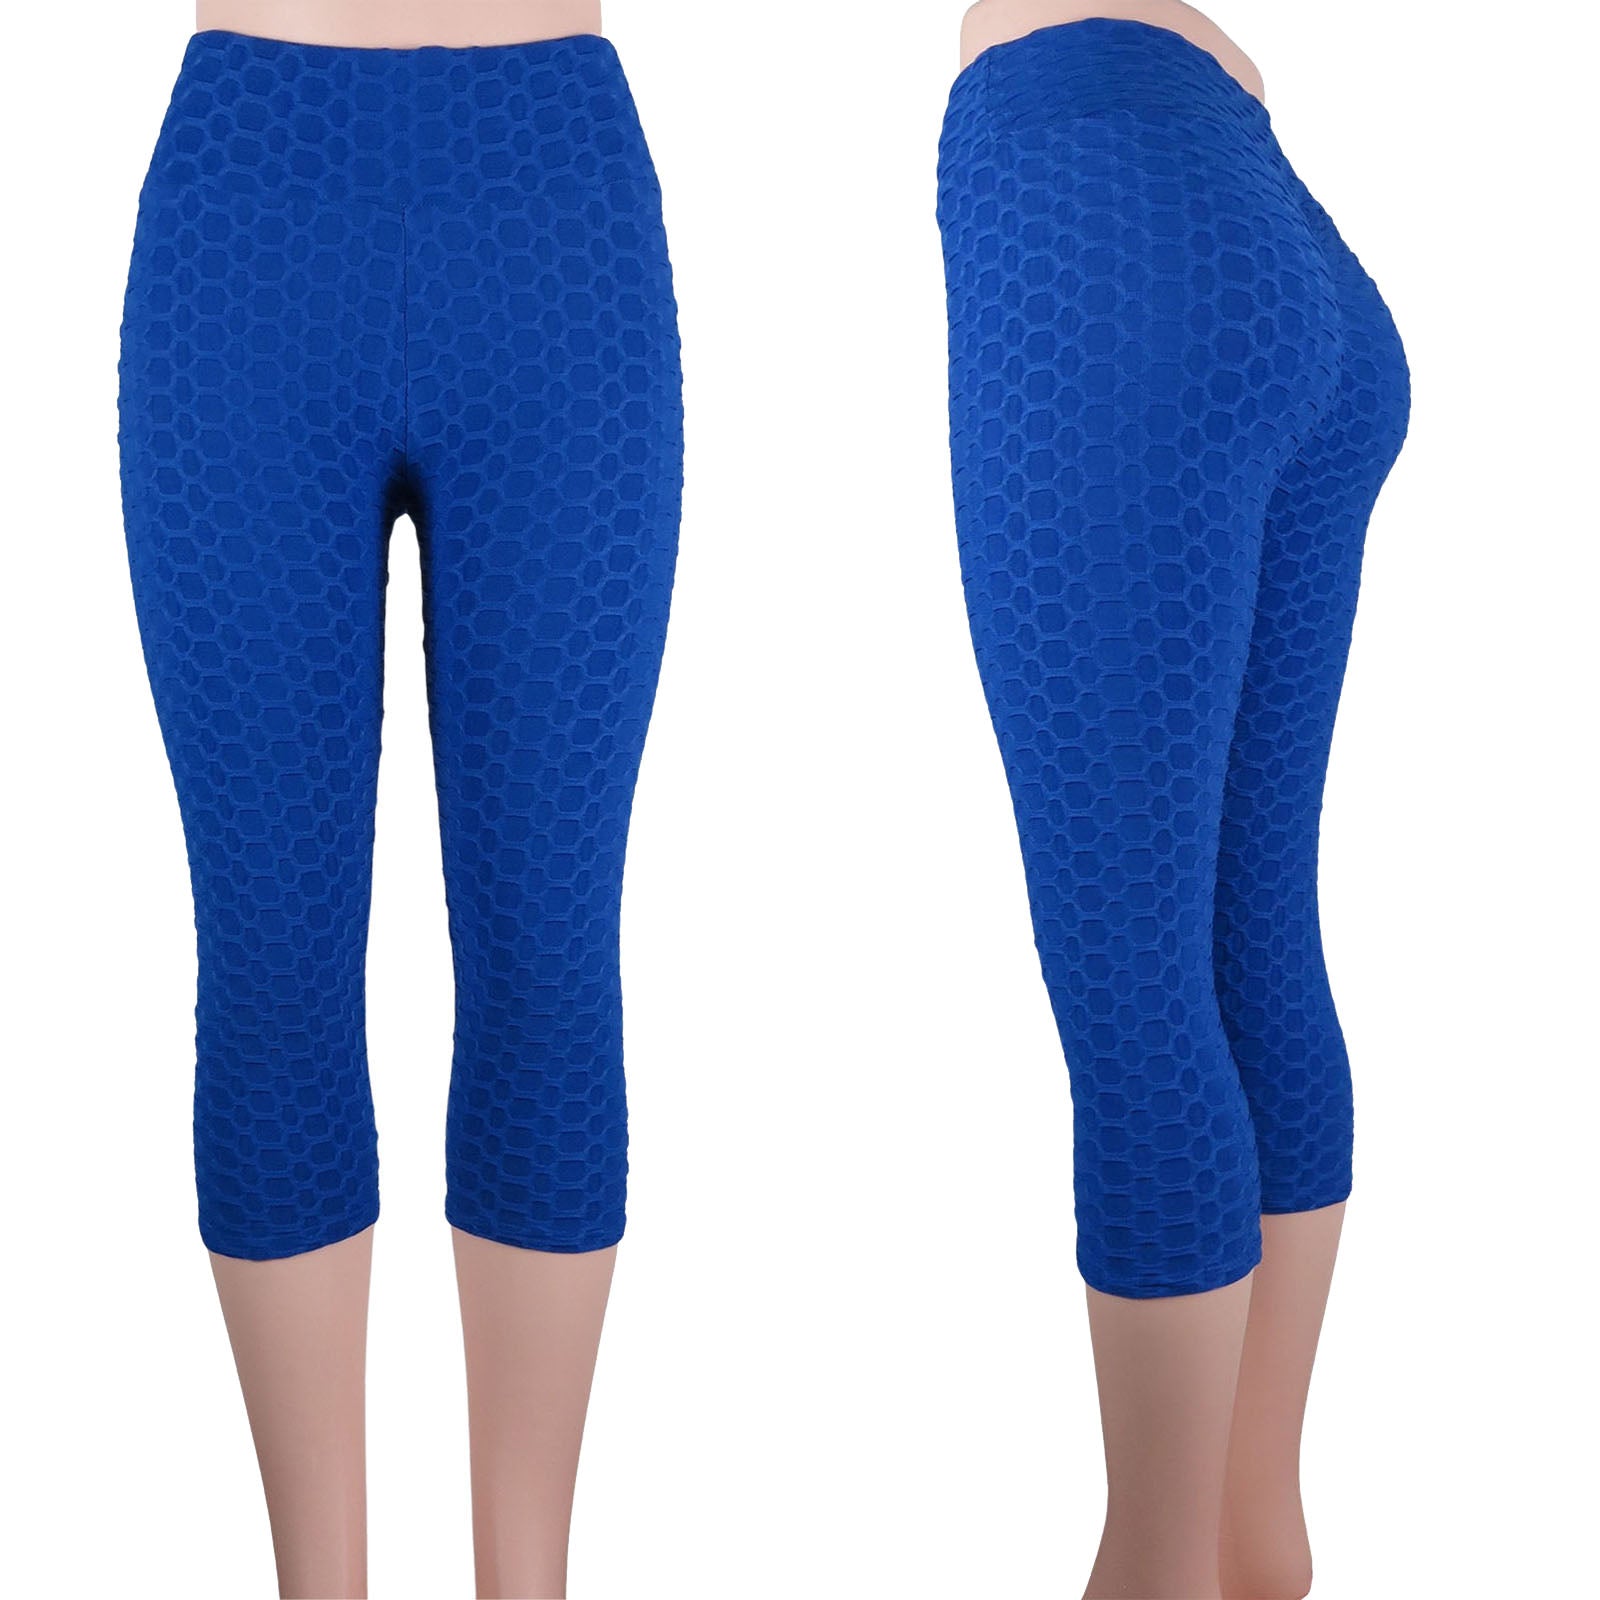 Wholesale Compression Leggings Women's Butt Lifting High-Waisted